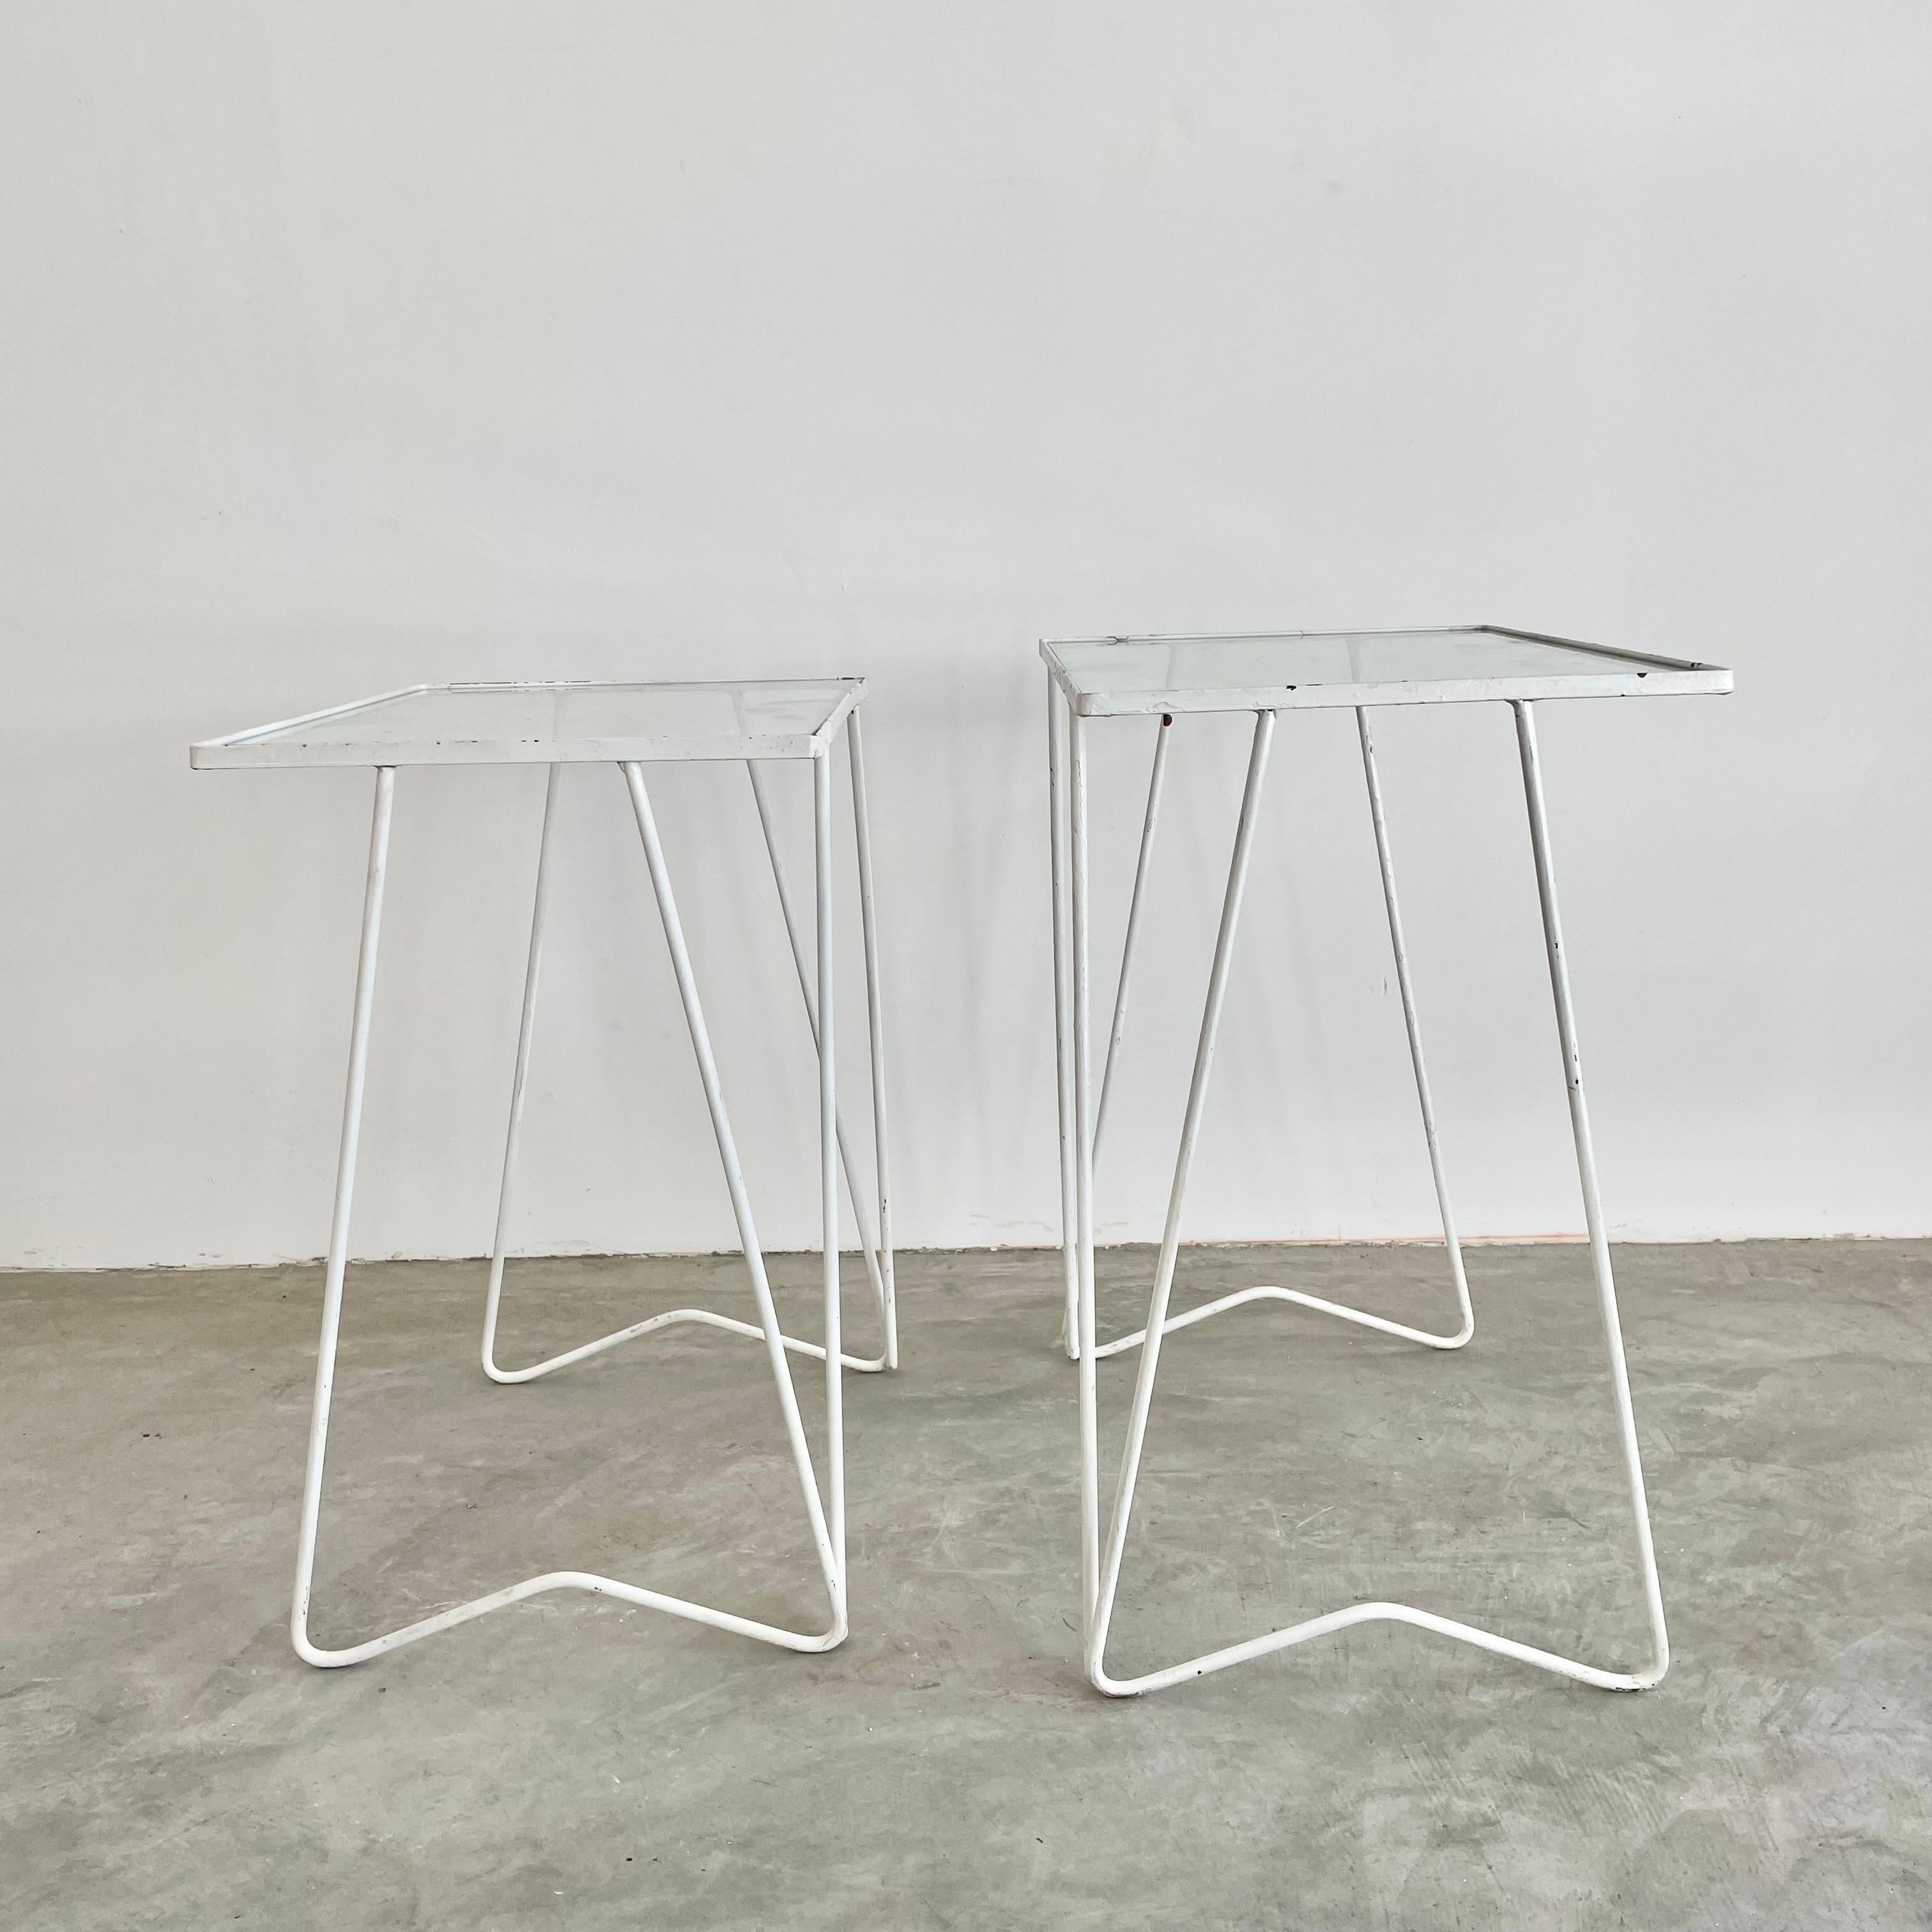 Pair of Iron and Glass Nesting Tables, 1970s USA For Sale 1